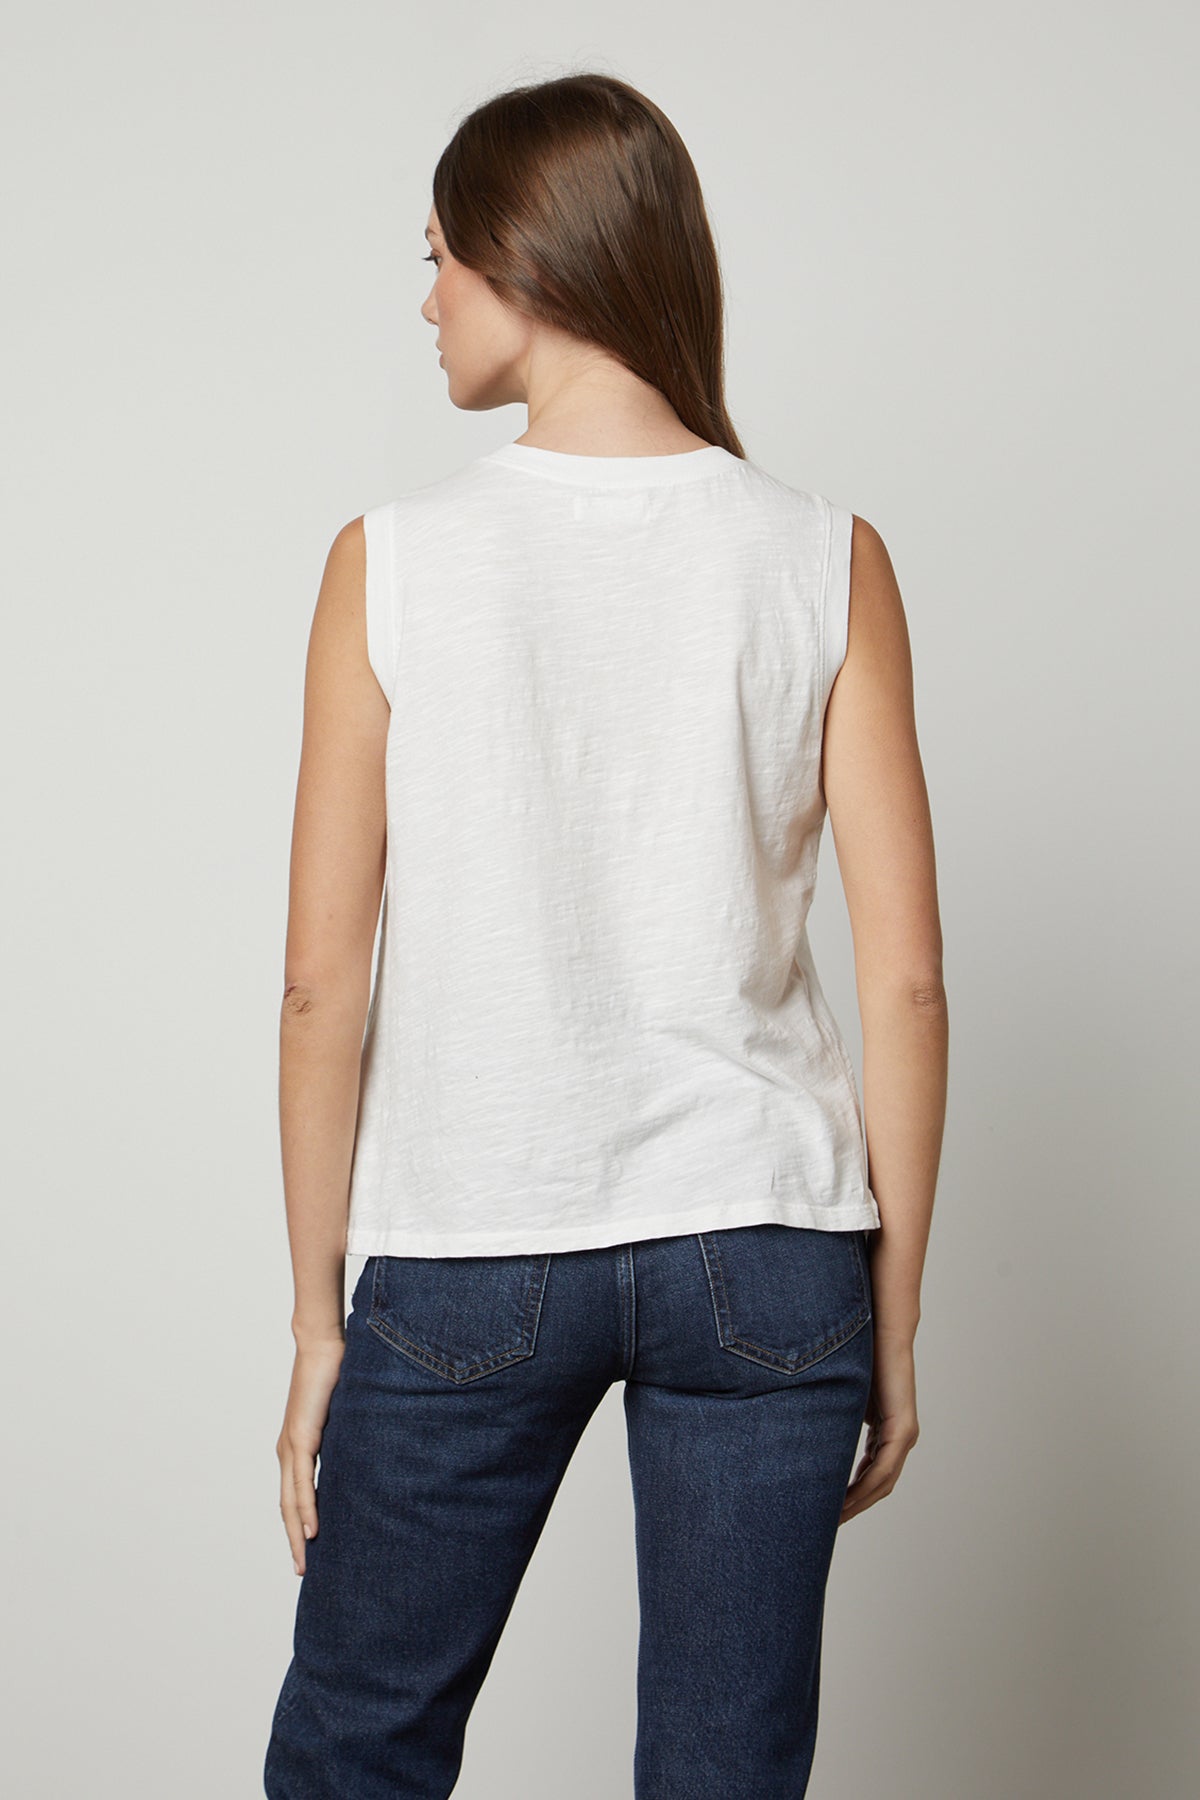 The back view of a woman wearing Velvet by Graham & Spencer's ELLEN VINTAGE SLUB TANK TOP and jeans.-26182429802689